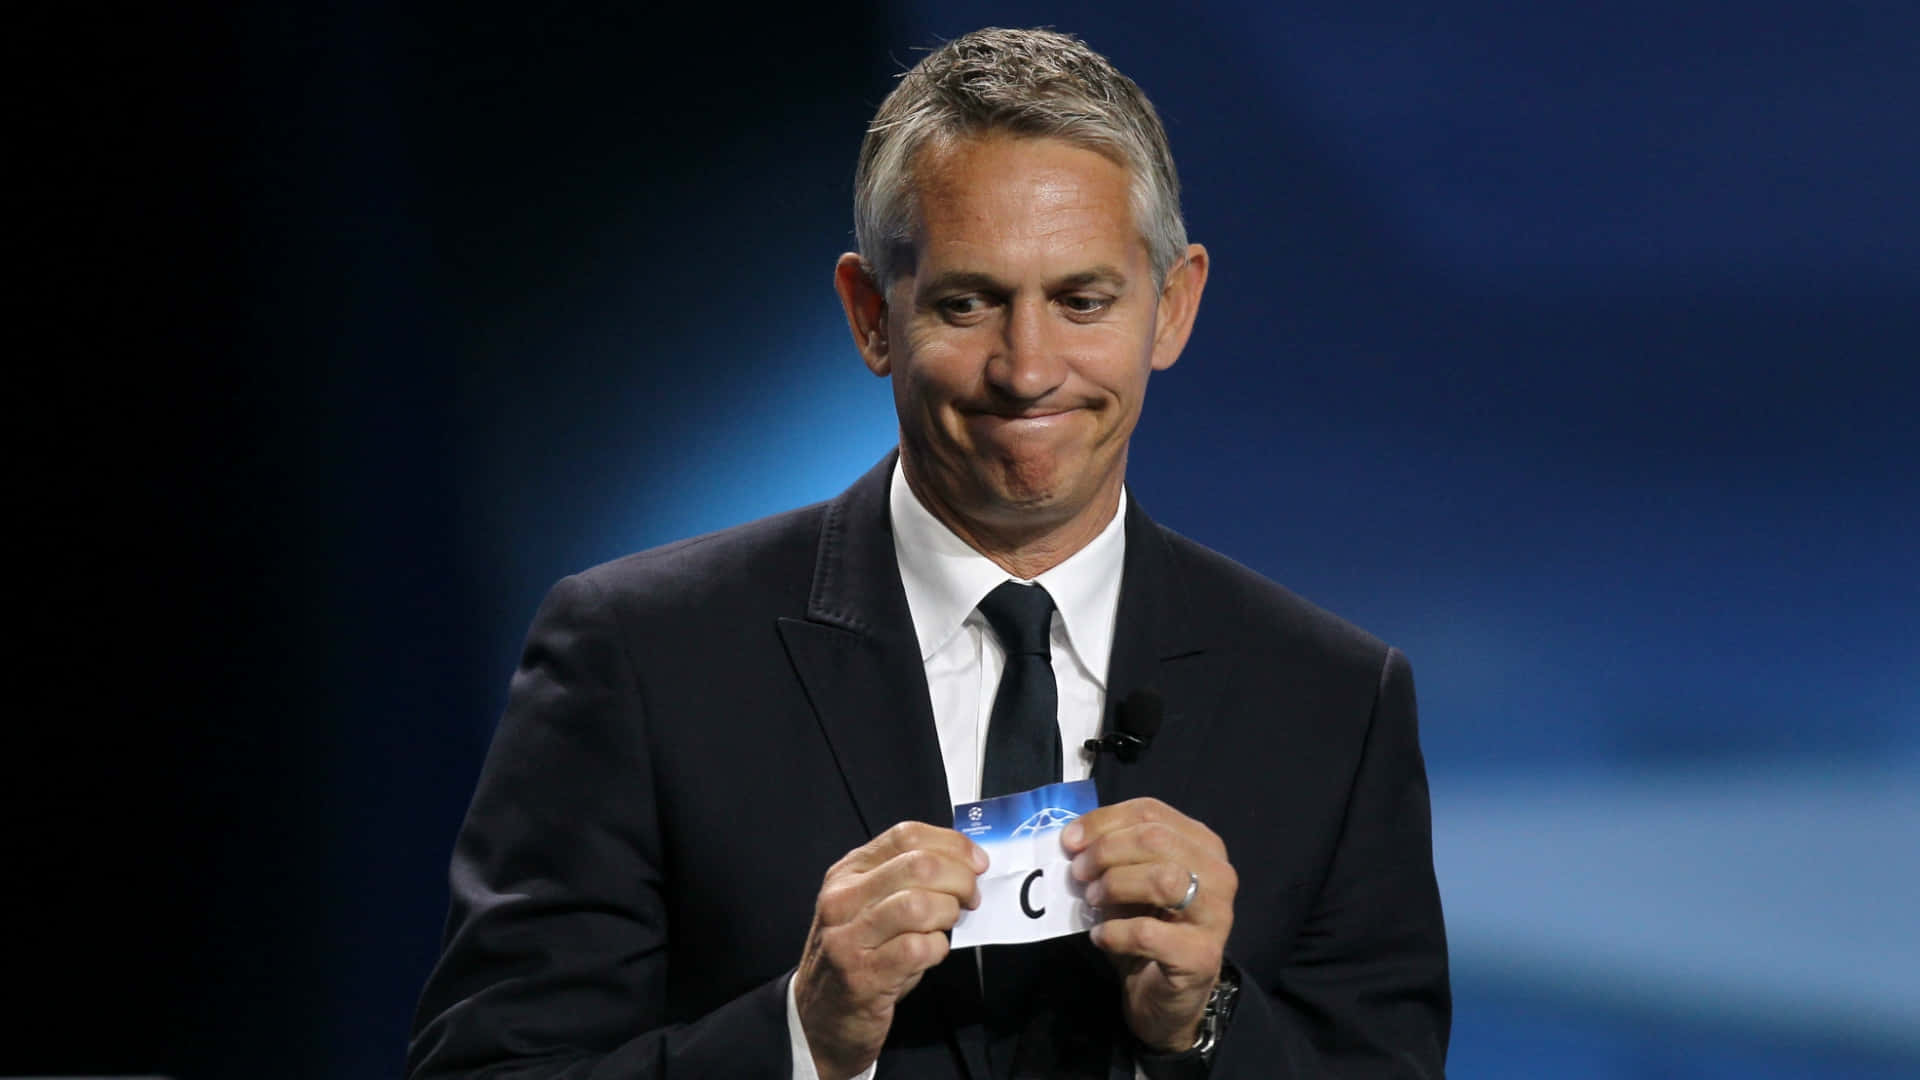 Gary Lineker, eloquent Football Broadcaster, delivering a presentation on stage. Wallpaper